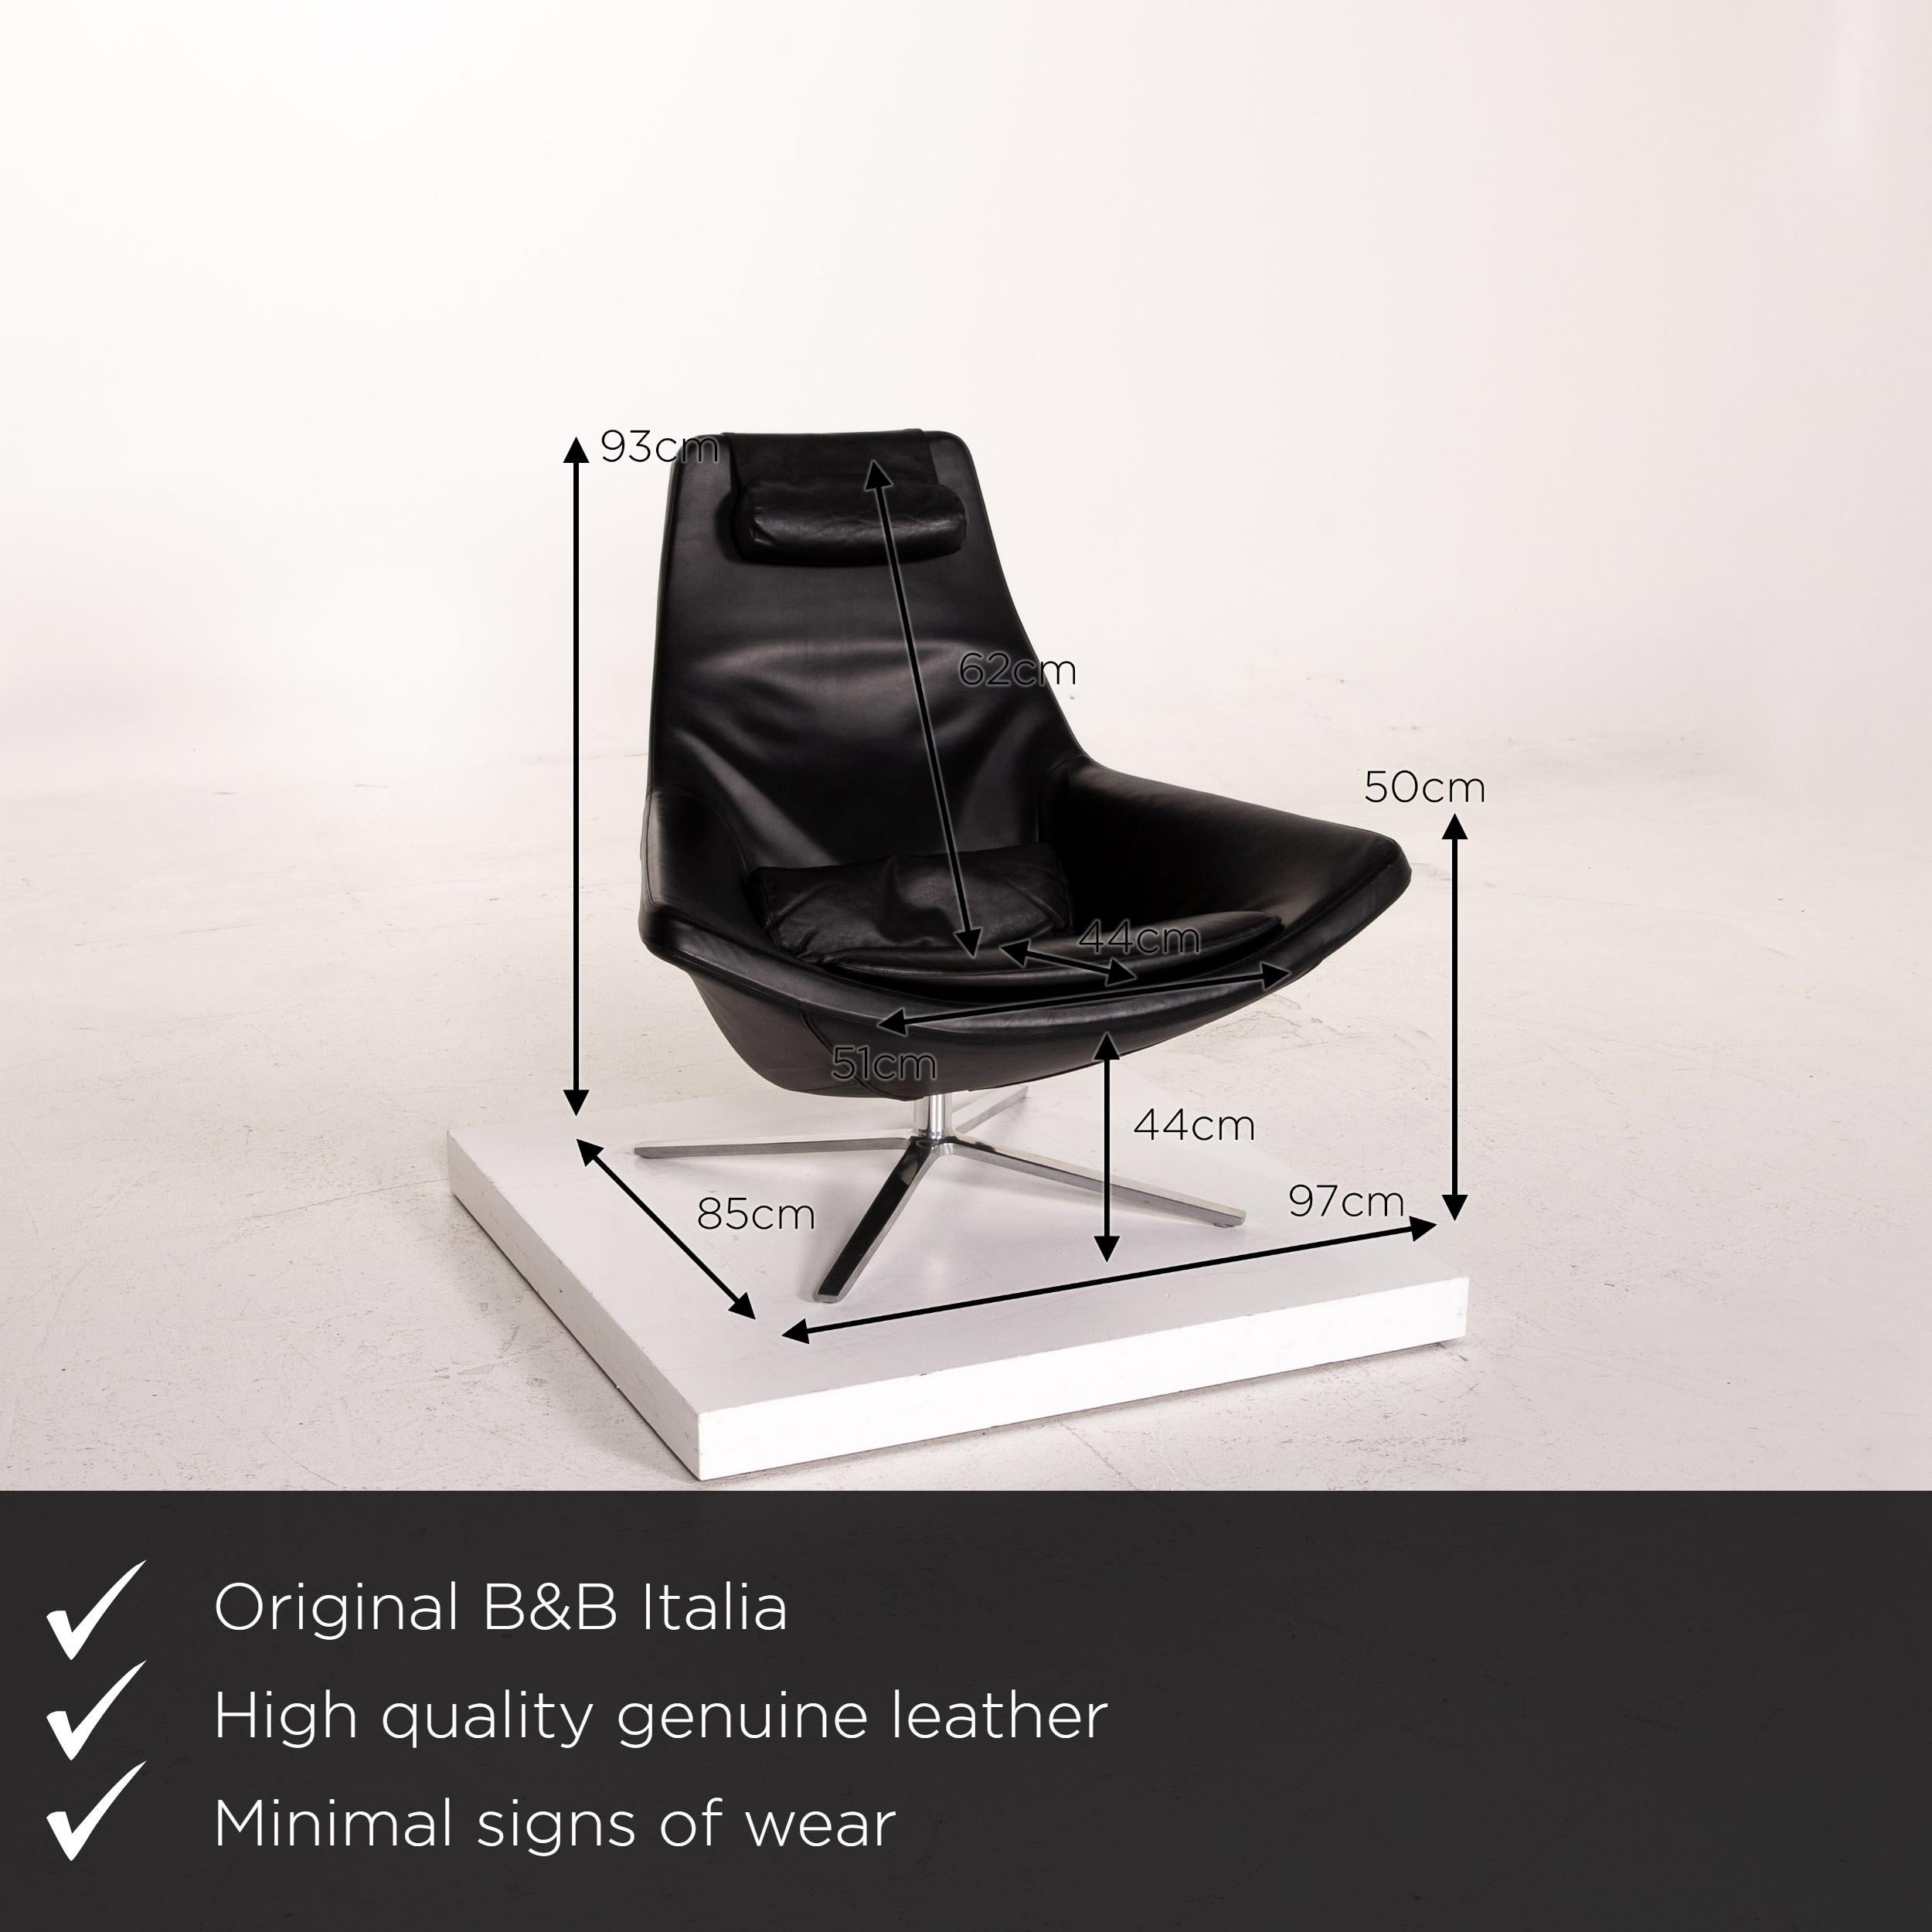 We present to you a B&B Italia Metropolitan leather armchair incl. Stool black.
 

 Product measurements in centimeters:
 

Depth 85
Width 97
Height 93
Seat height 44
Rest height 50
Seat depth 44
Seat width 51
Back height 62.
 